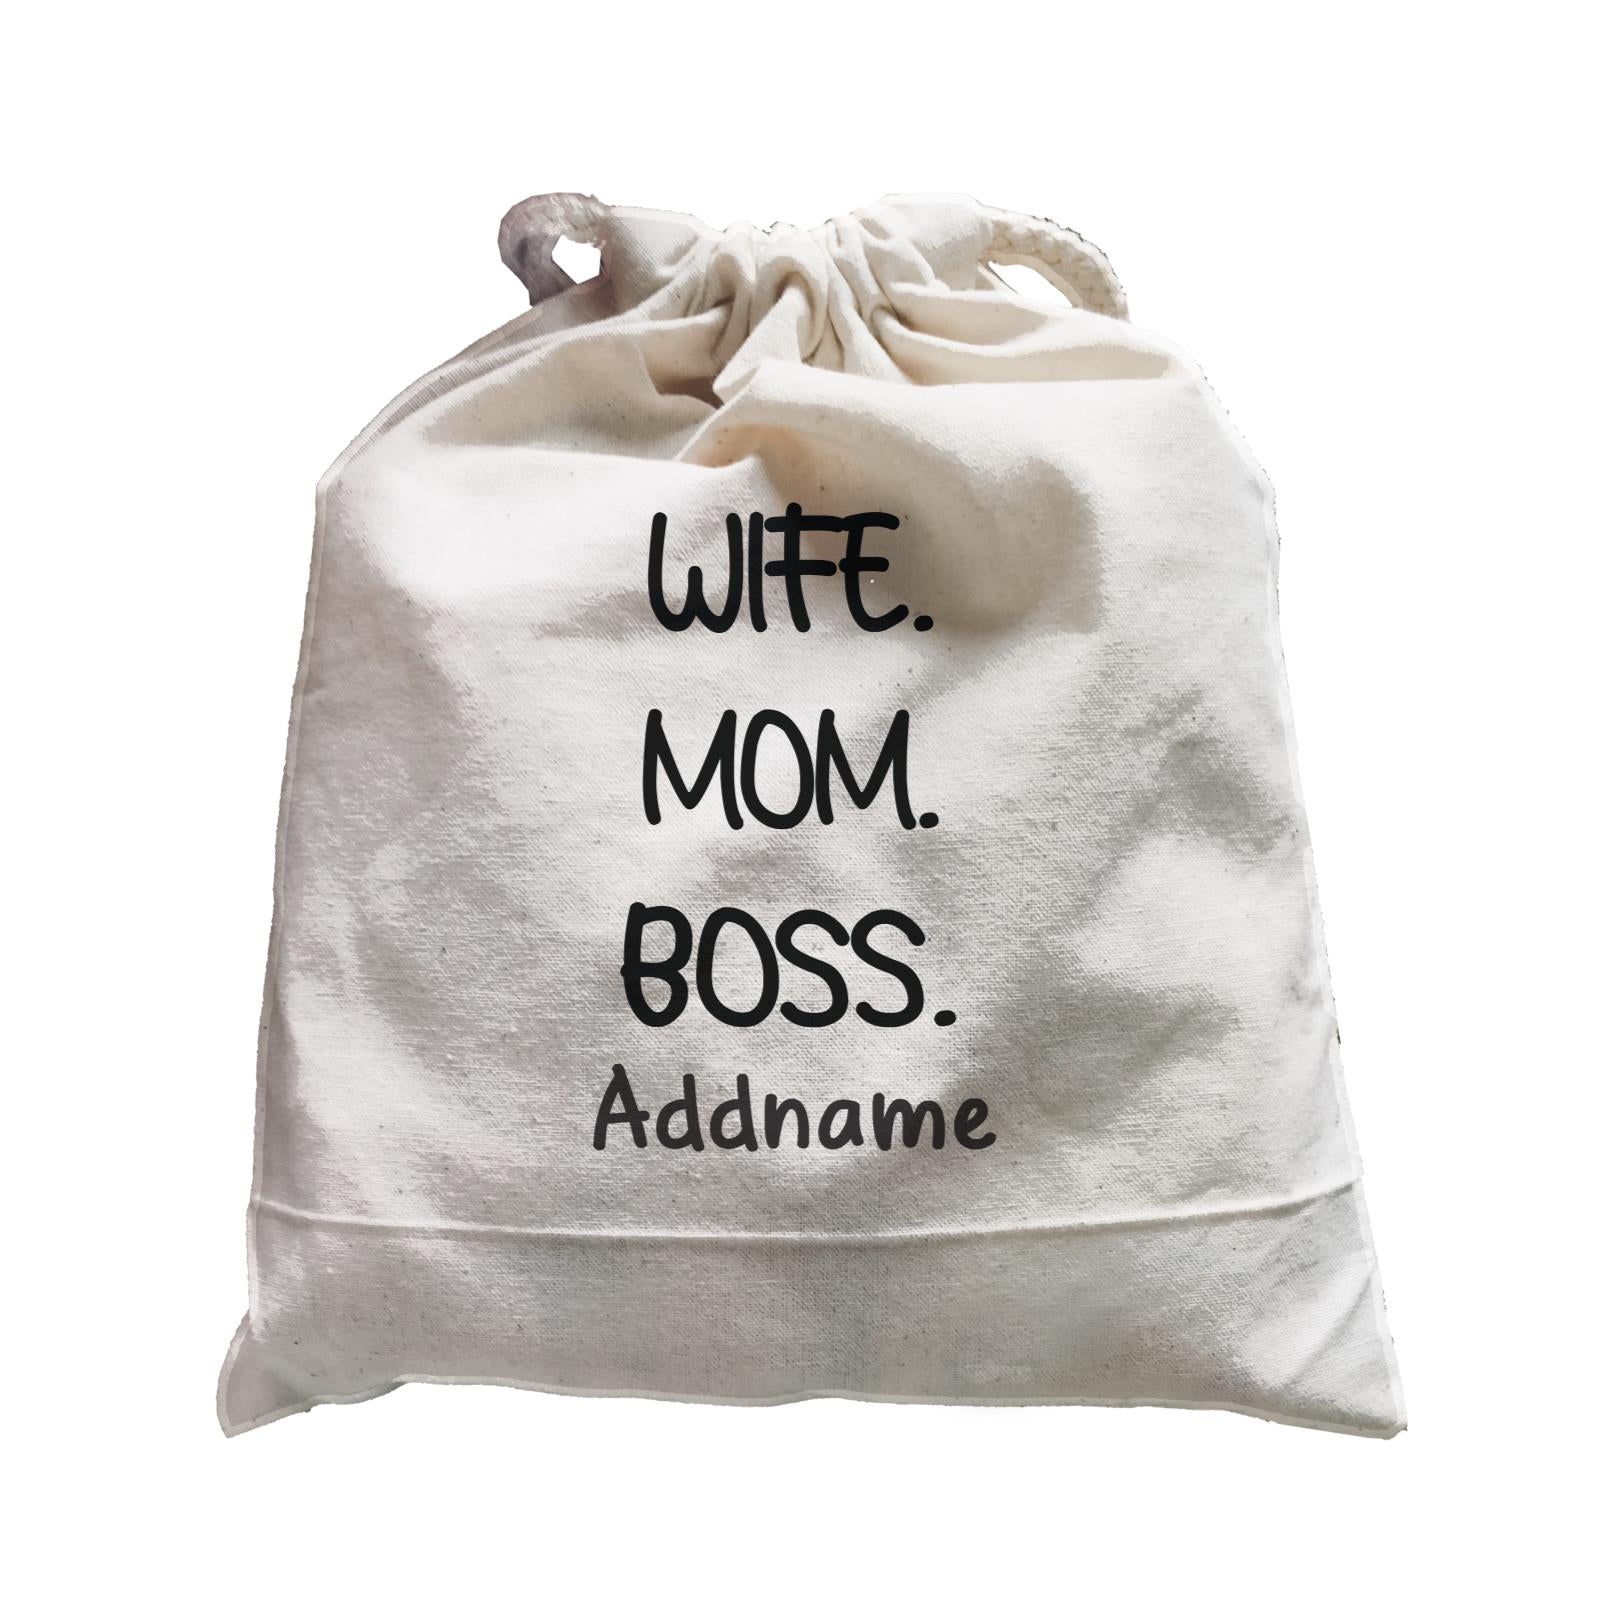 Girl Boss Quotes Cute Typefont Wife Mom Boss Addname Satchel